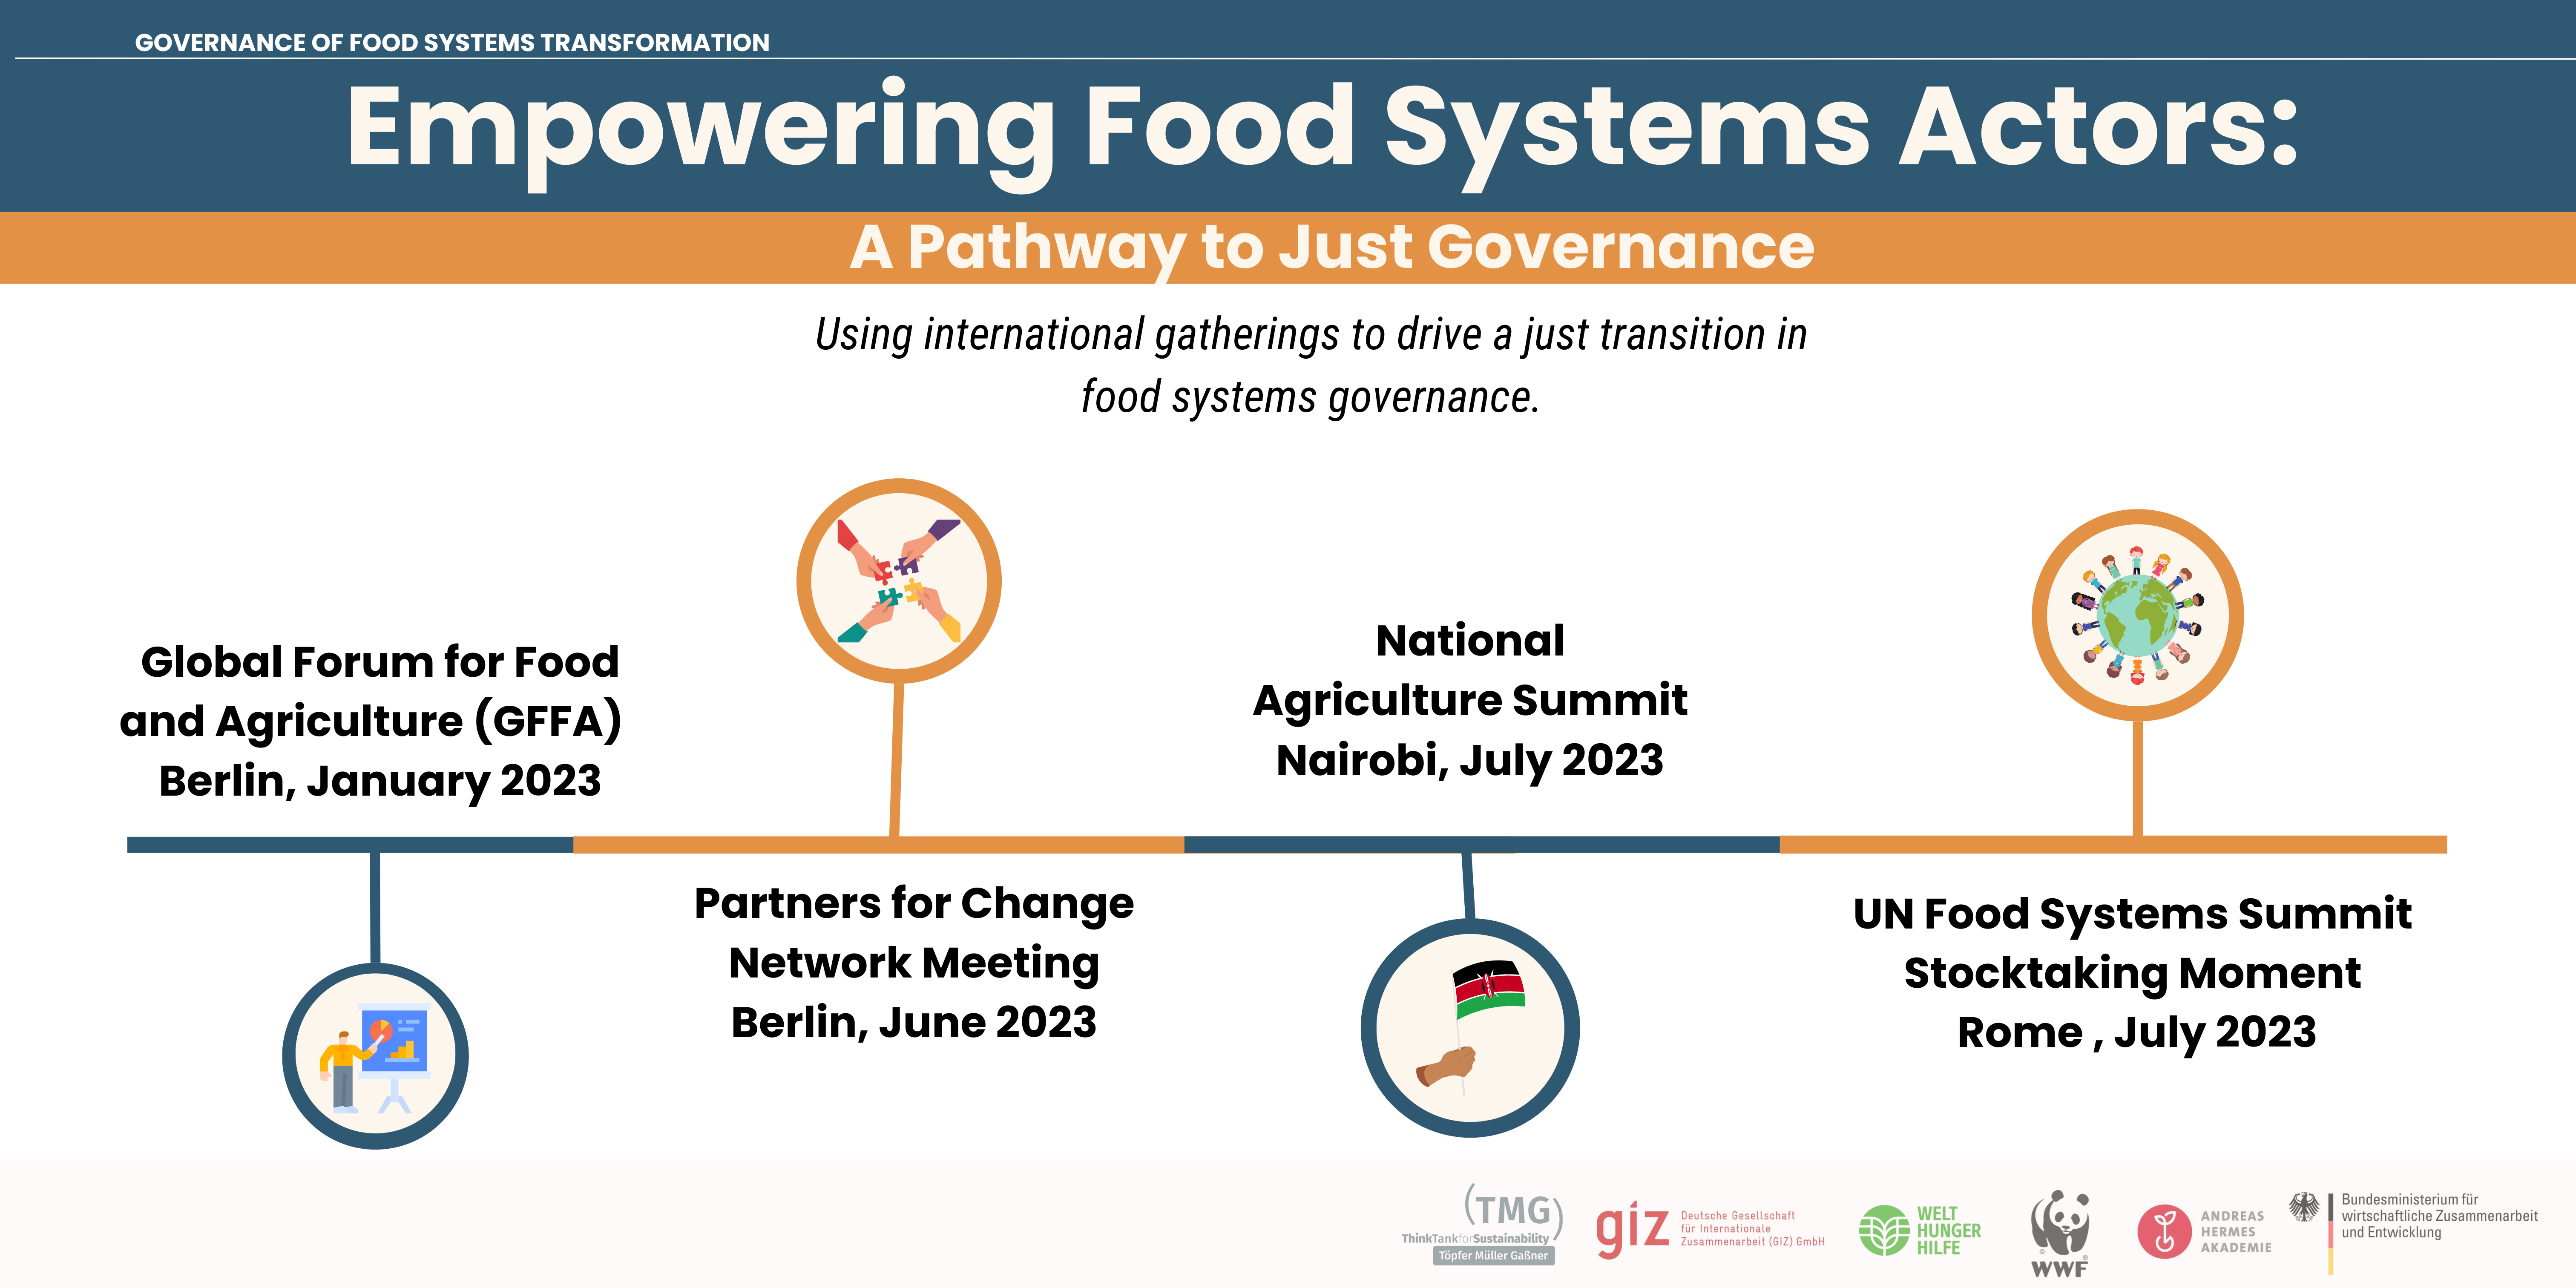 Empowering Food Systems Actors: A Pathway to Just Governance